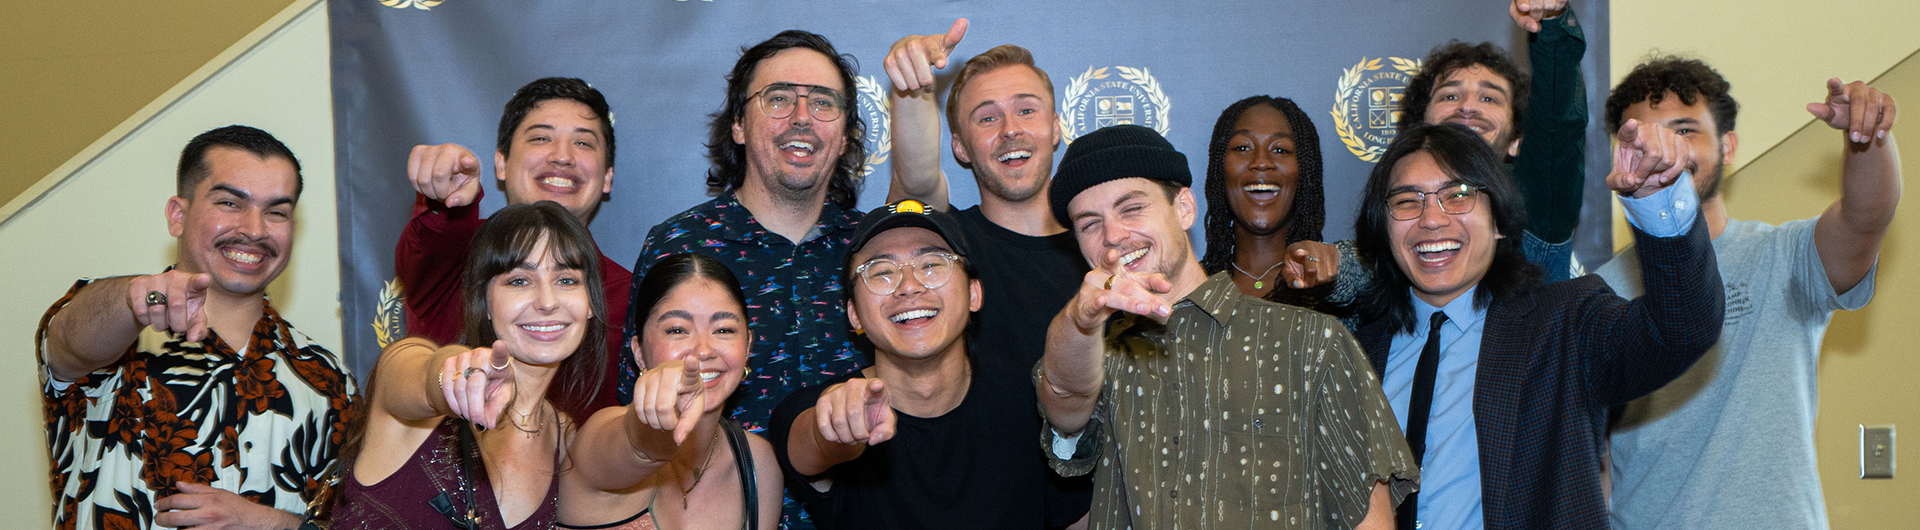 Group of CSULB Film students in front of CSULB Seal backdrop